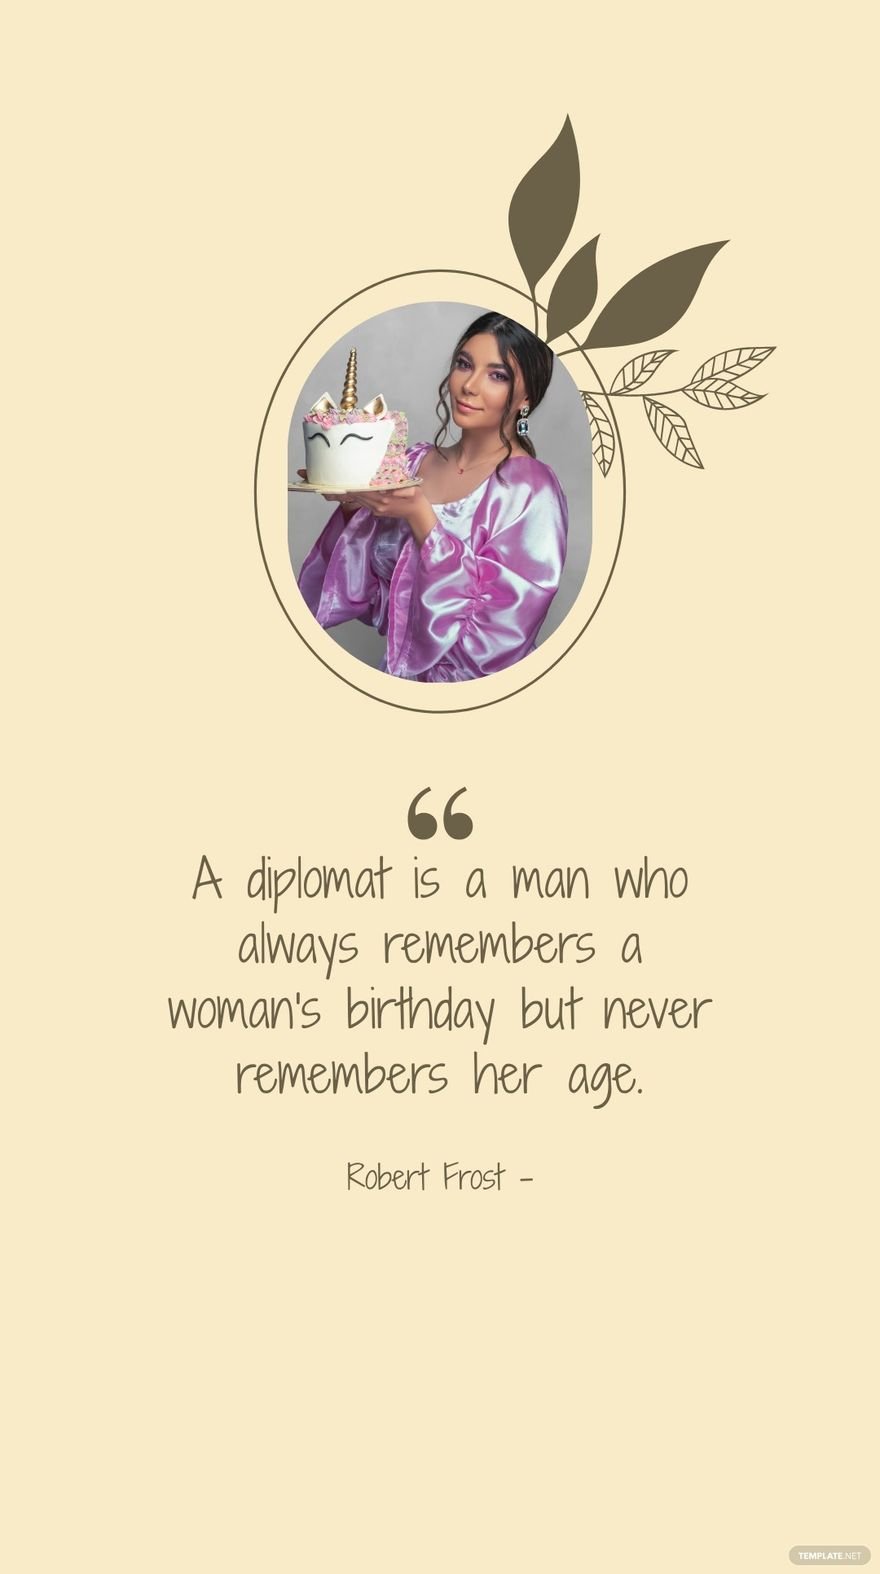 Robert Frost - A diplomat is a man who always remembers a woman's birthday but never remembers her age.